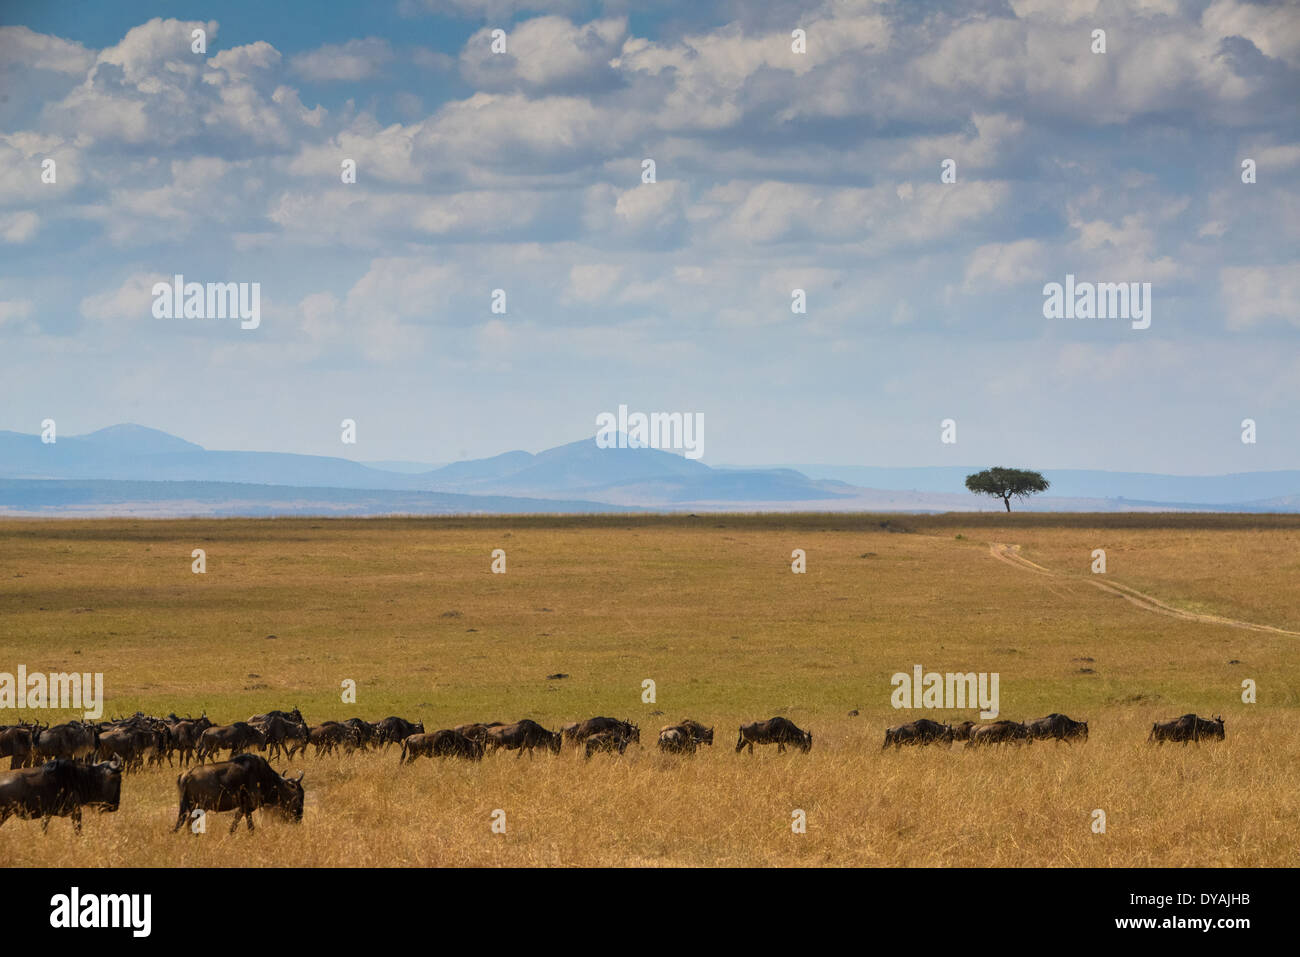 a group of gnoes or wildebeests on track in Masai Mara, Kenya, Africa Stock Photo